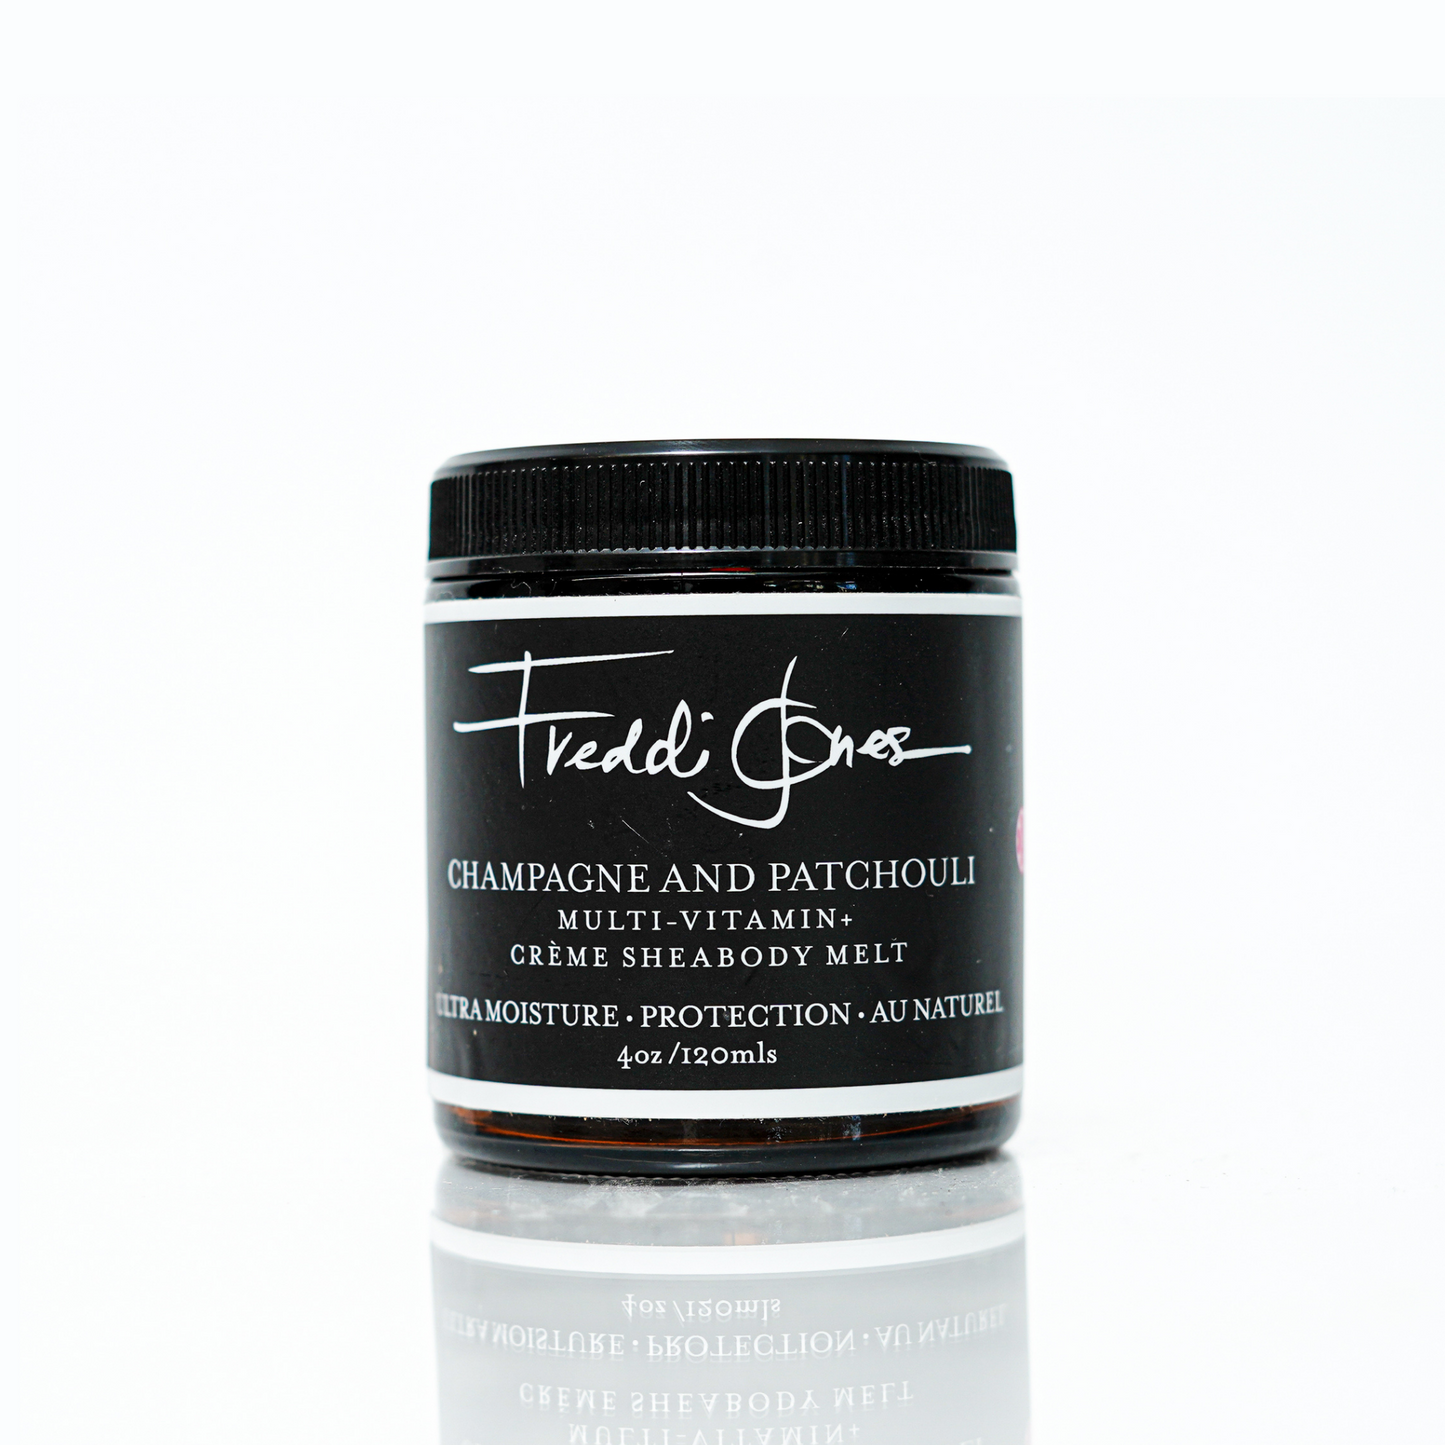 "Talk about Skin Rejuvenation! This moisturizer does this very thing. It's the moisturizer I didn't know I needed!! -Pamela W. Freddi Jones Customer